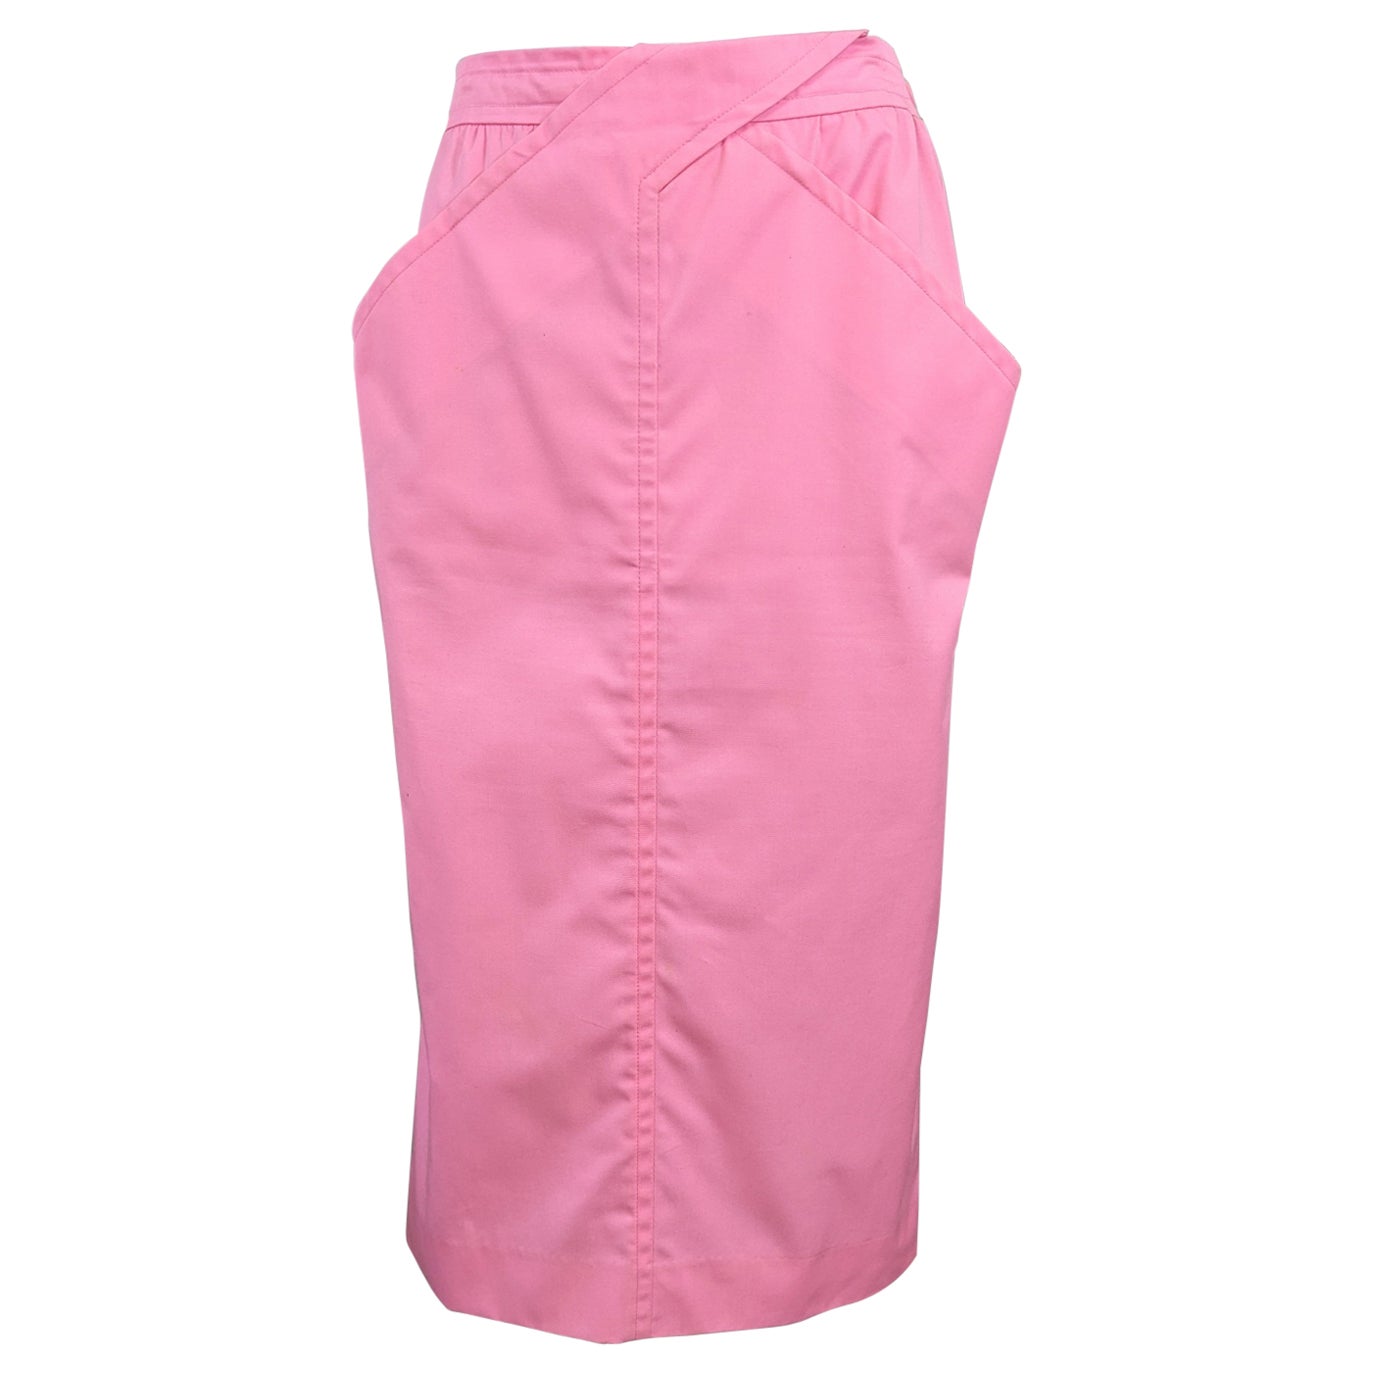 Andre Courreges Pink Crossover Skirt For Sale